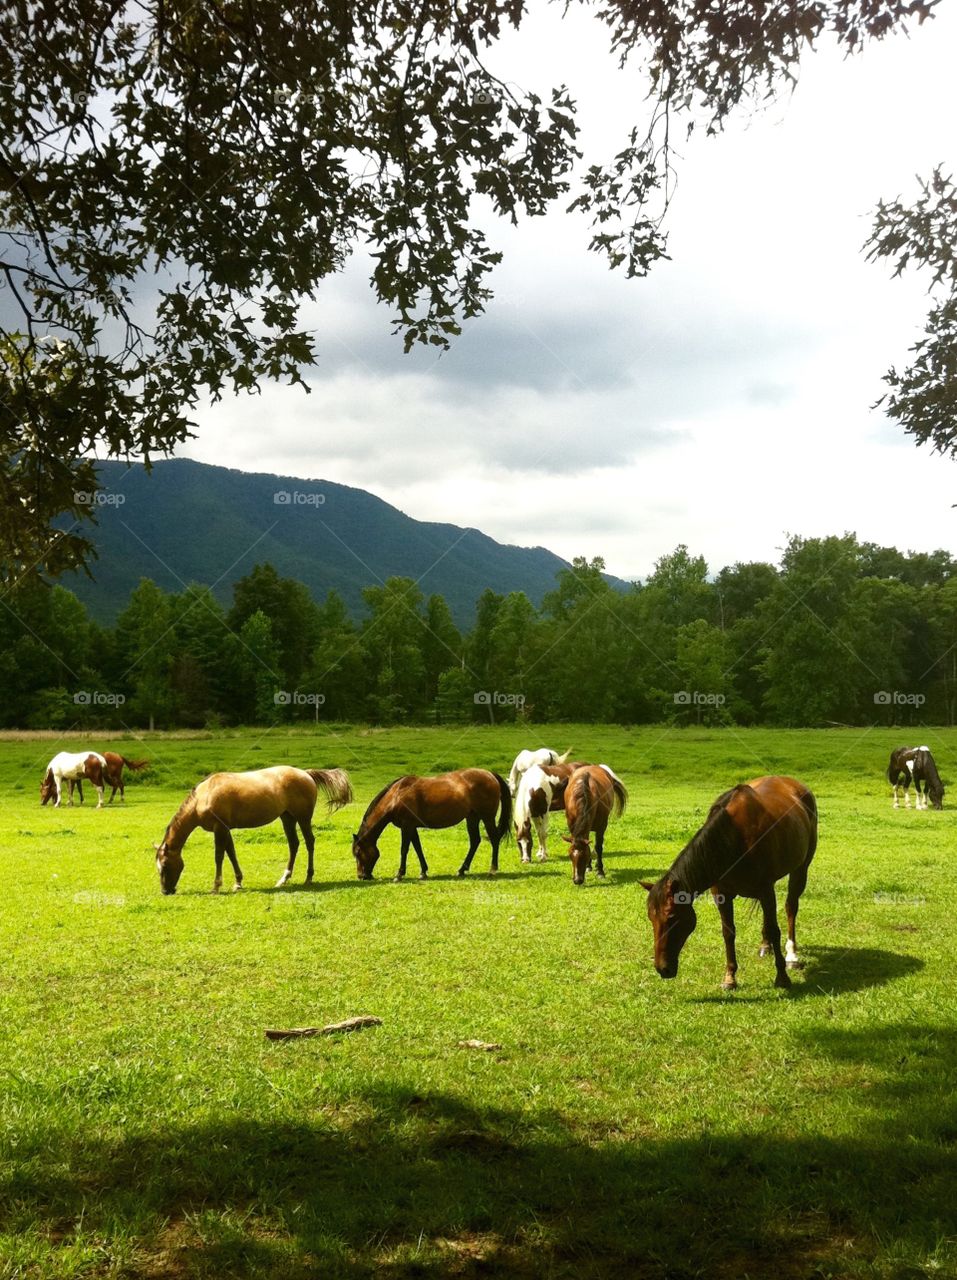 East Tennessee Pastoral . Horses graze in the mountains of East Tennessee